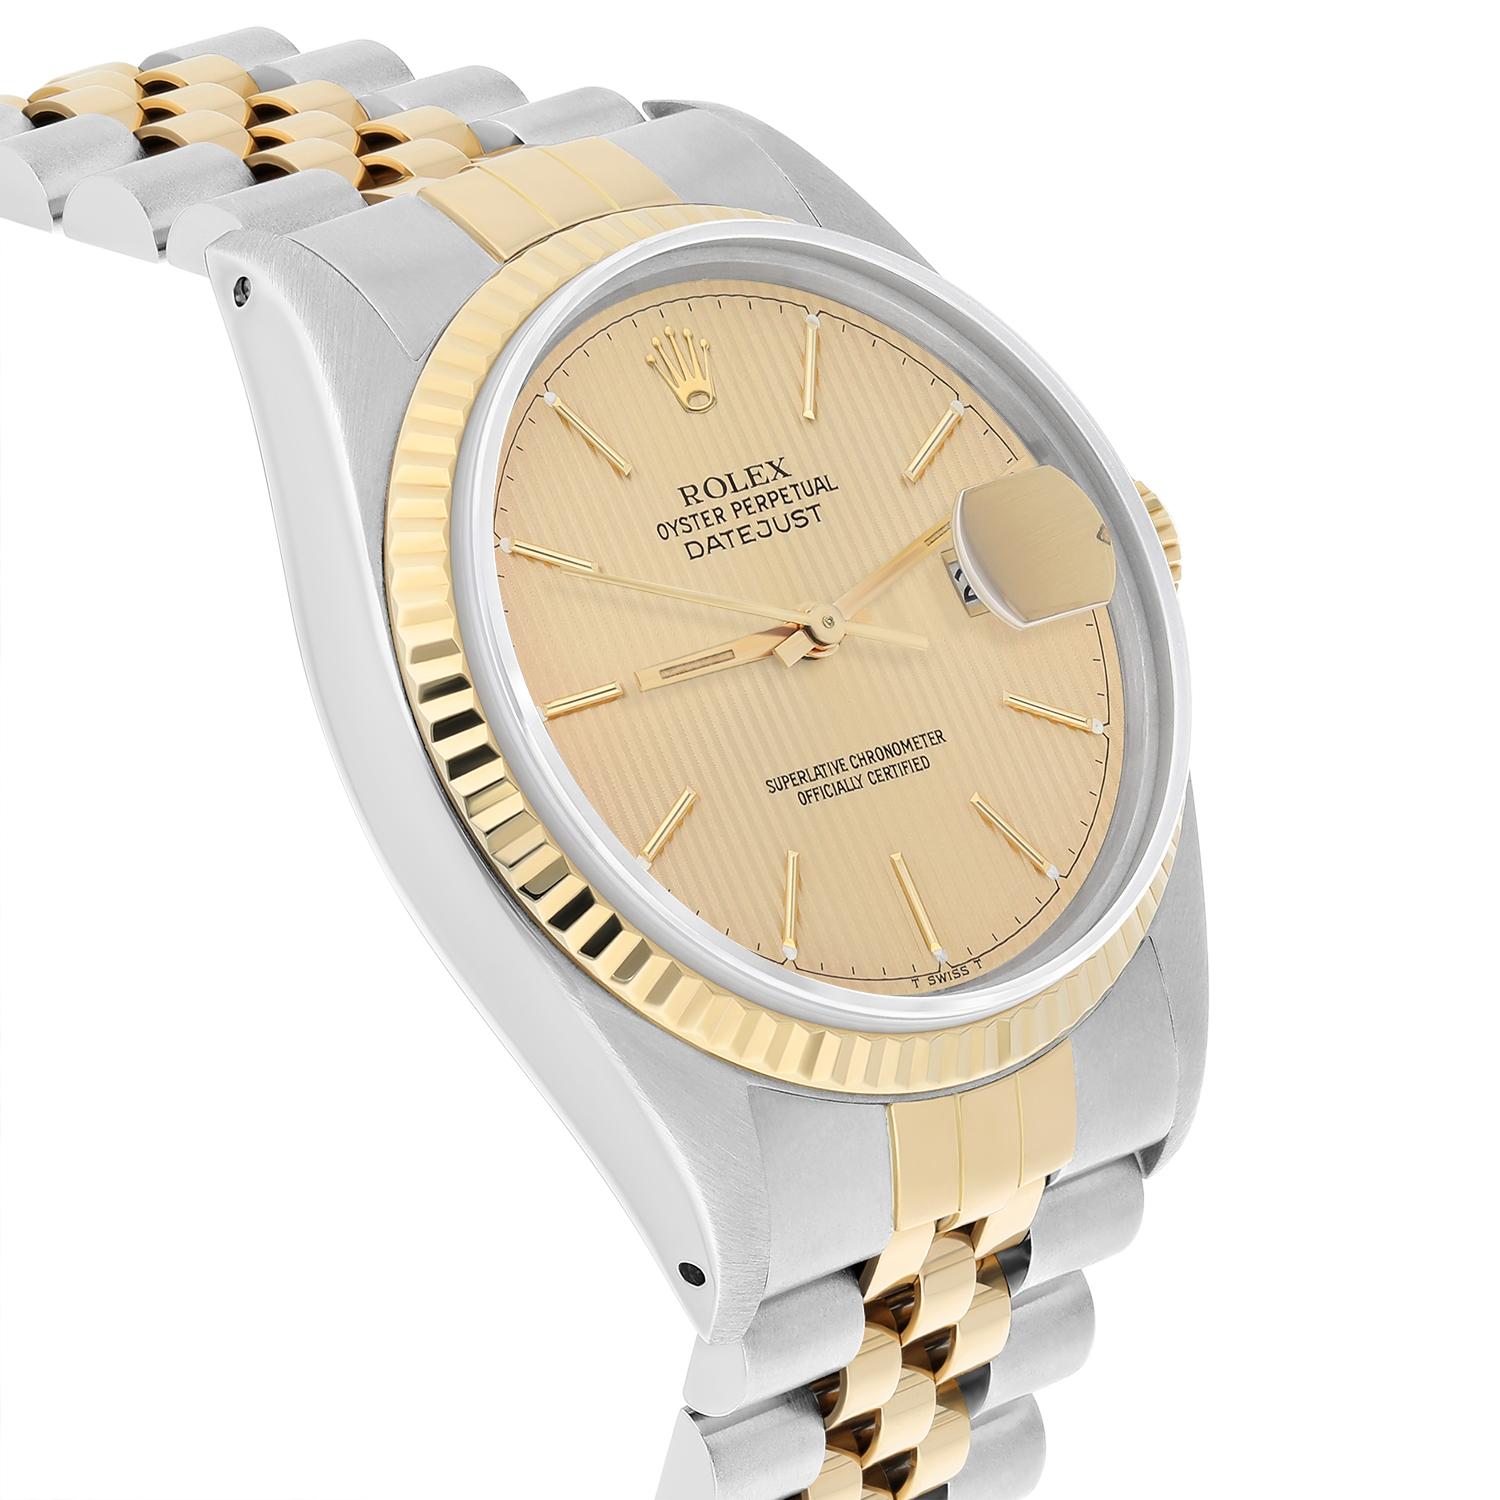 Rolex Datejust 36mm Two Tone Champagne Dial Jubilee 16013 Circa 1988 Papers Excellent état - En vente à New York, NY